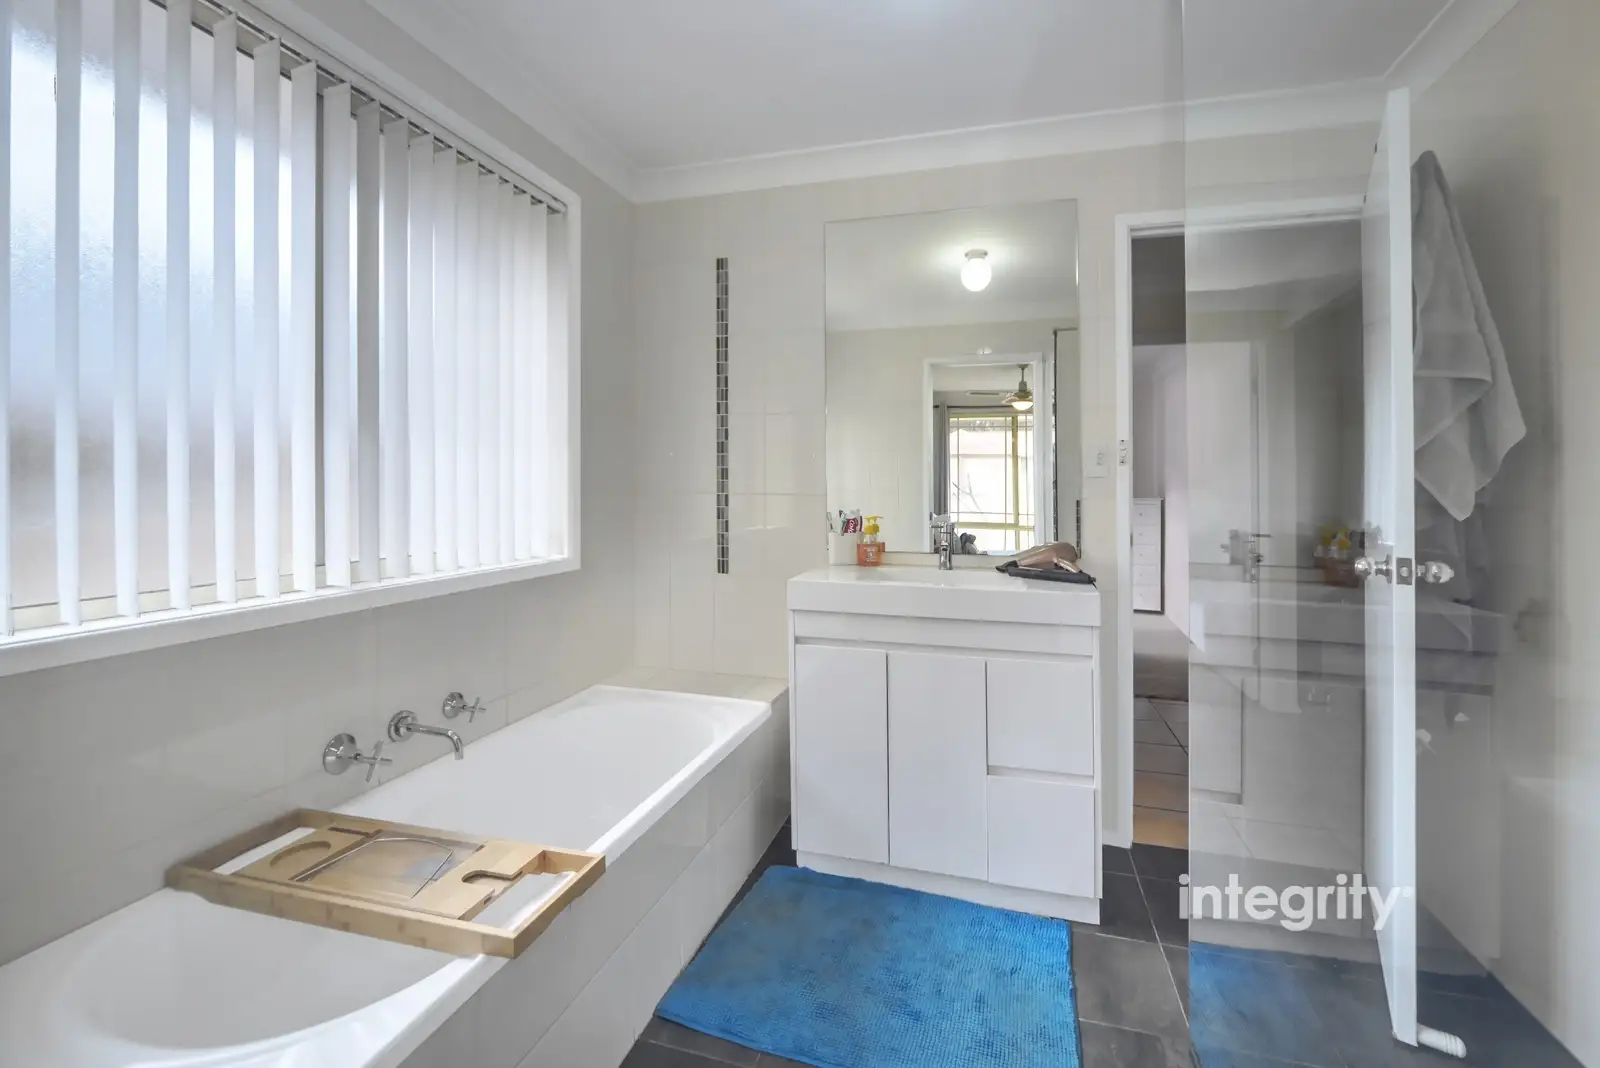 4 Olympic Drive, West Nowra For Sale by Integrity Real Estate - image 9